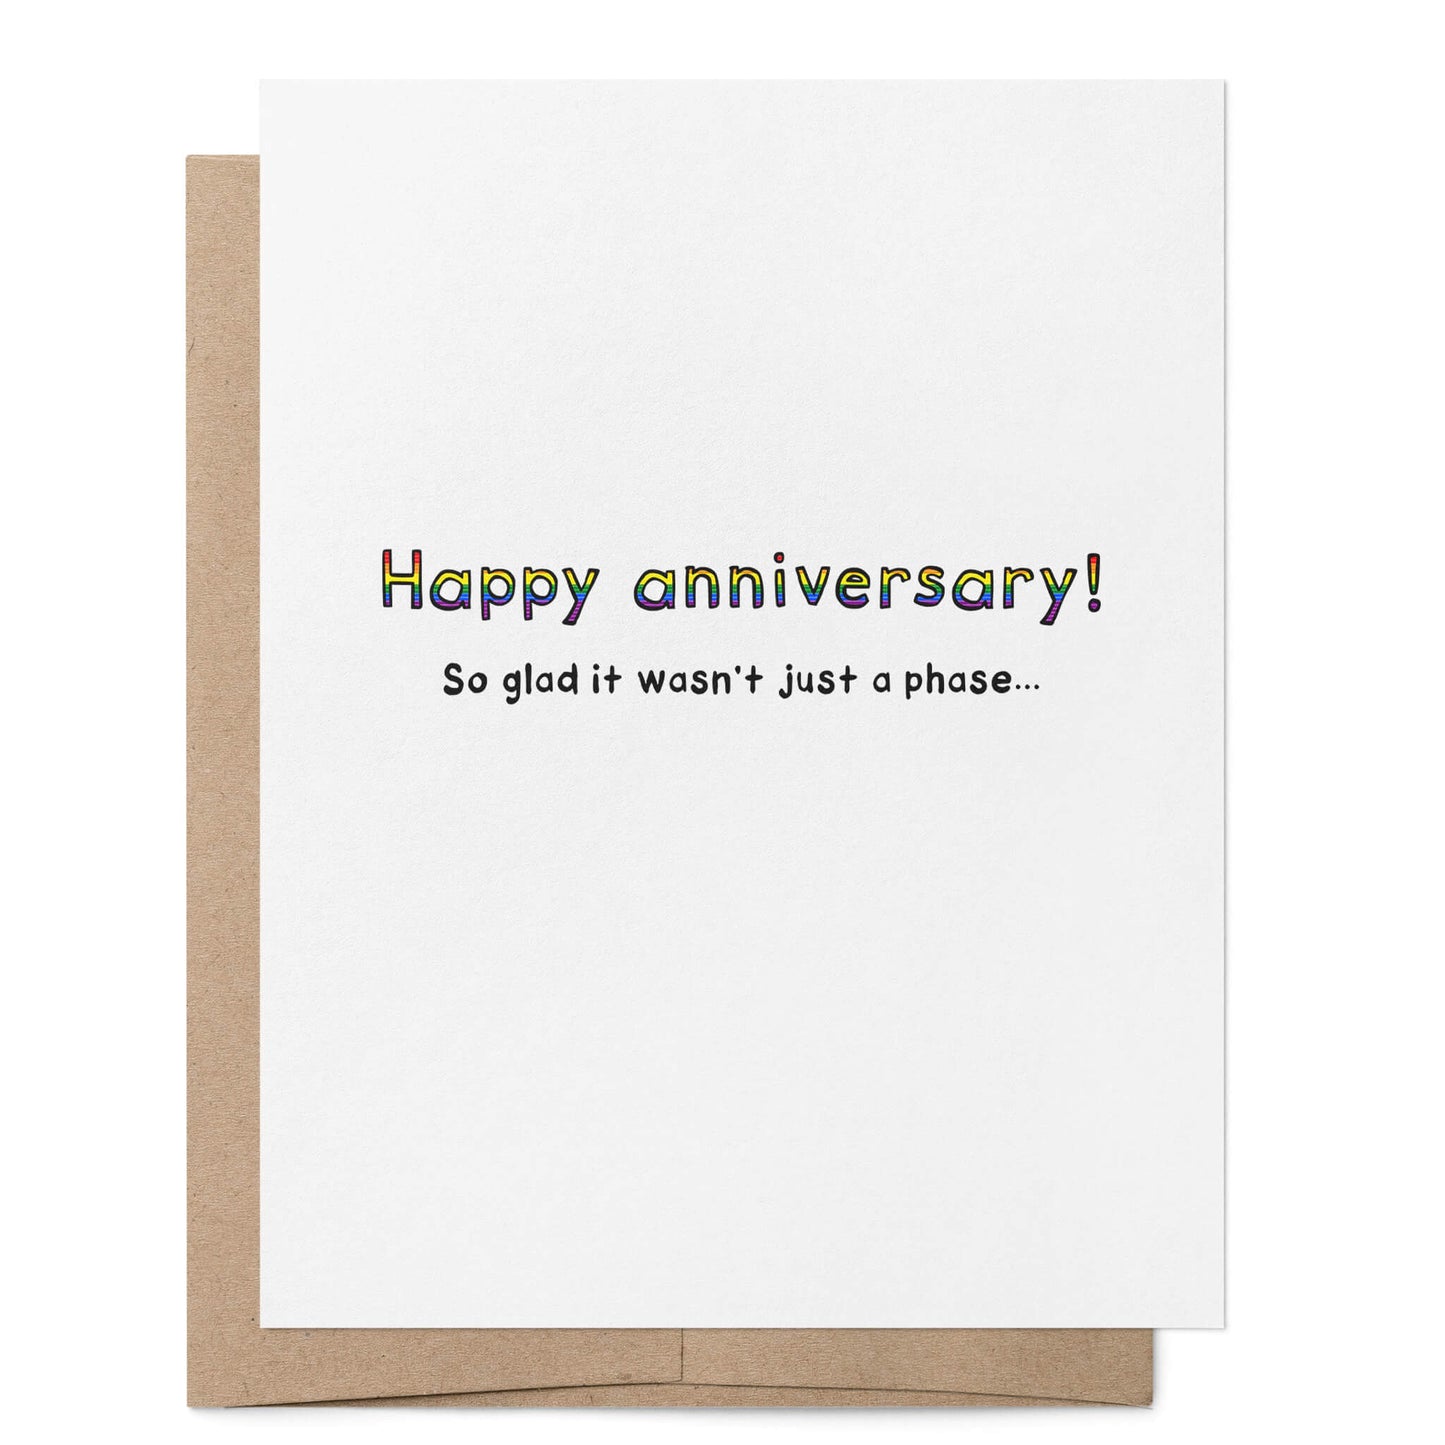 So Glad it Wasn't Just a Phase Anniversary Card